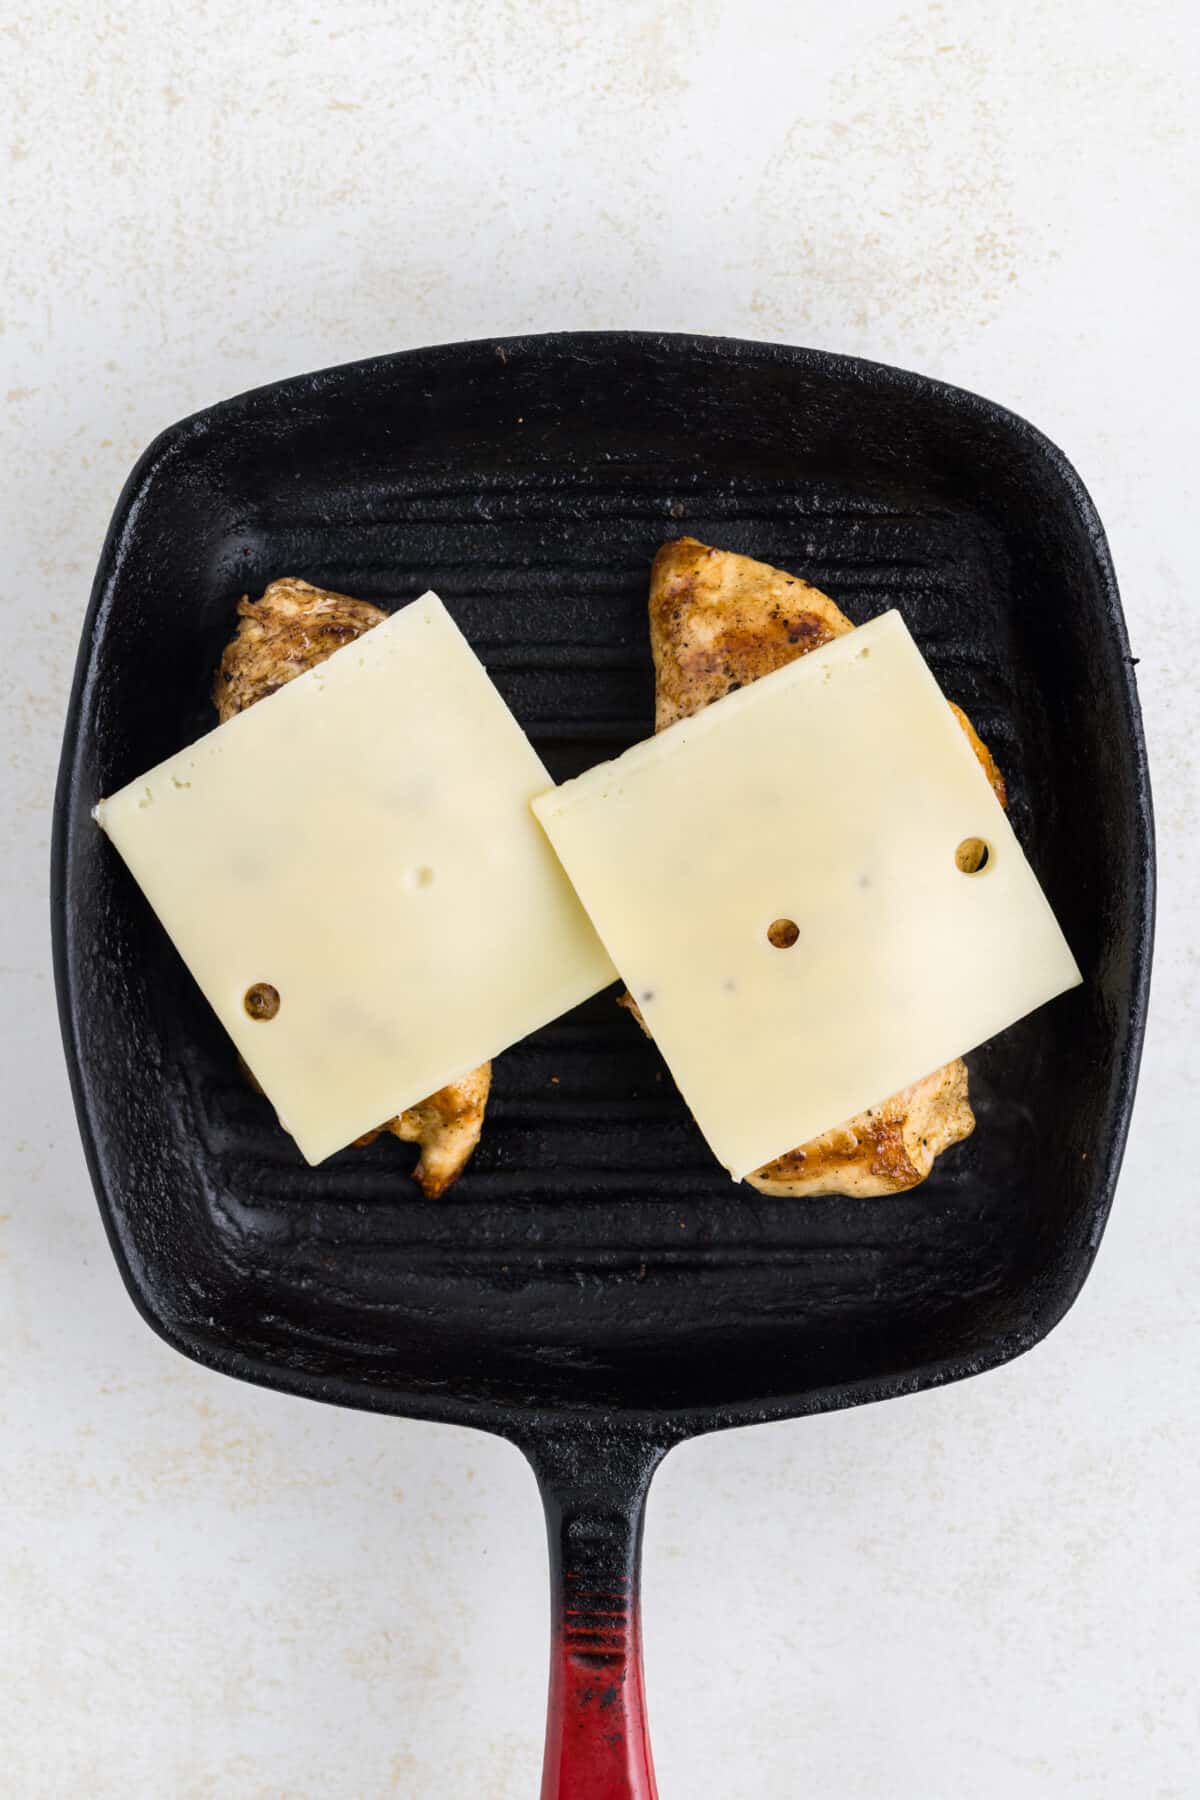 slices of Swiss cheese on the cooked grilled chicken for the sandwiches.